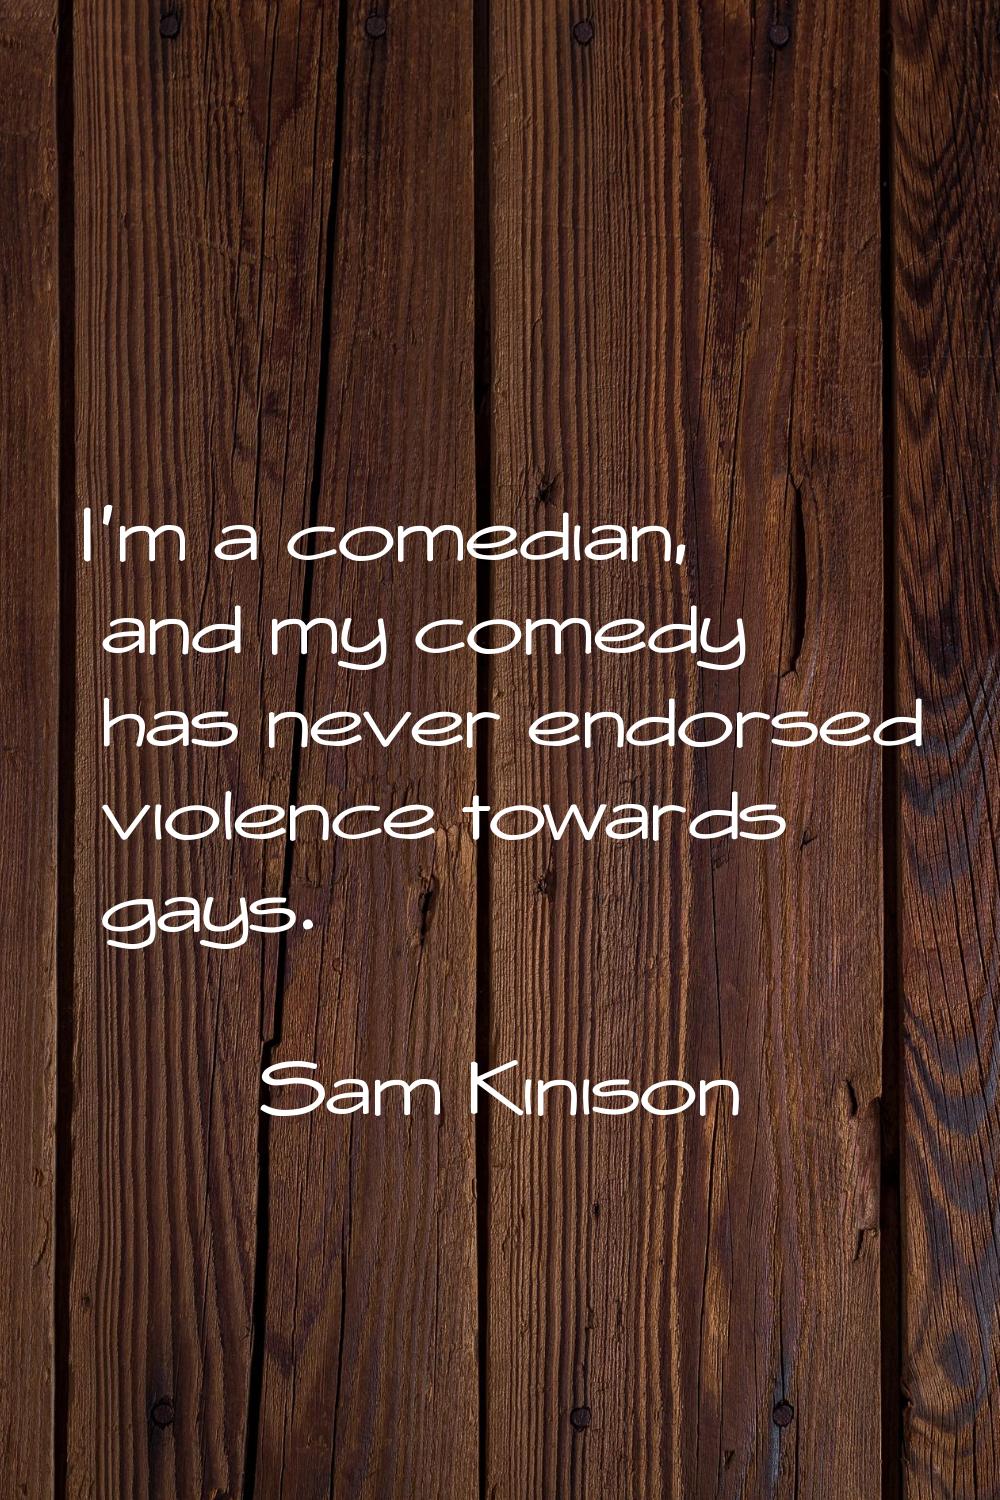 I'm a comedian, and my comedy has never endorsed violence towards gays.